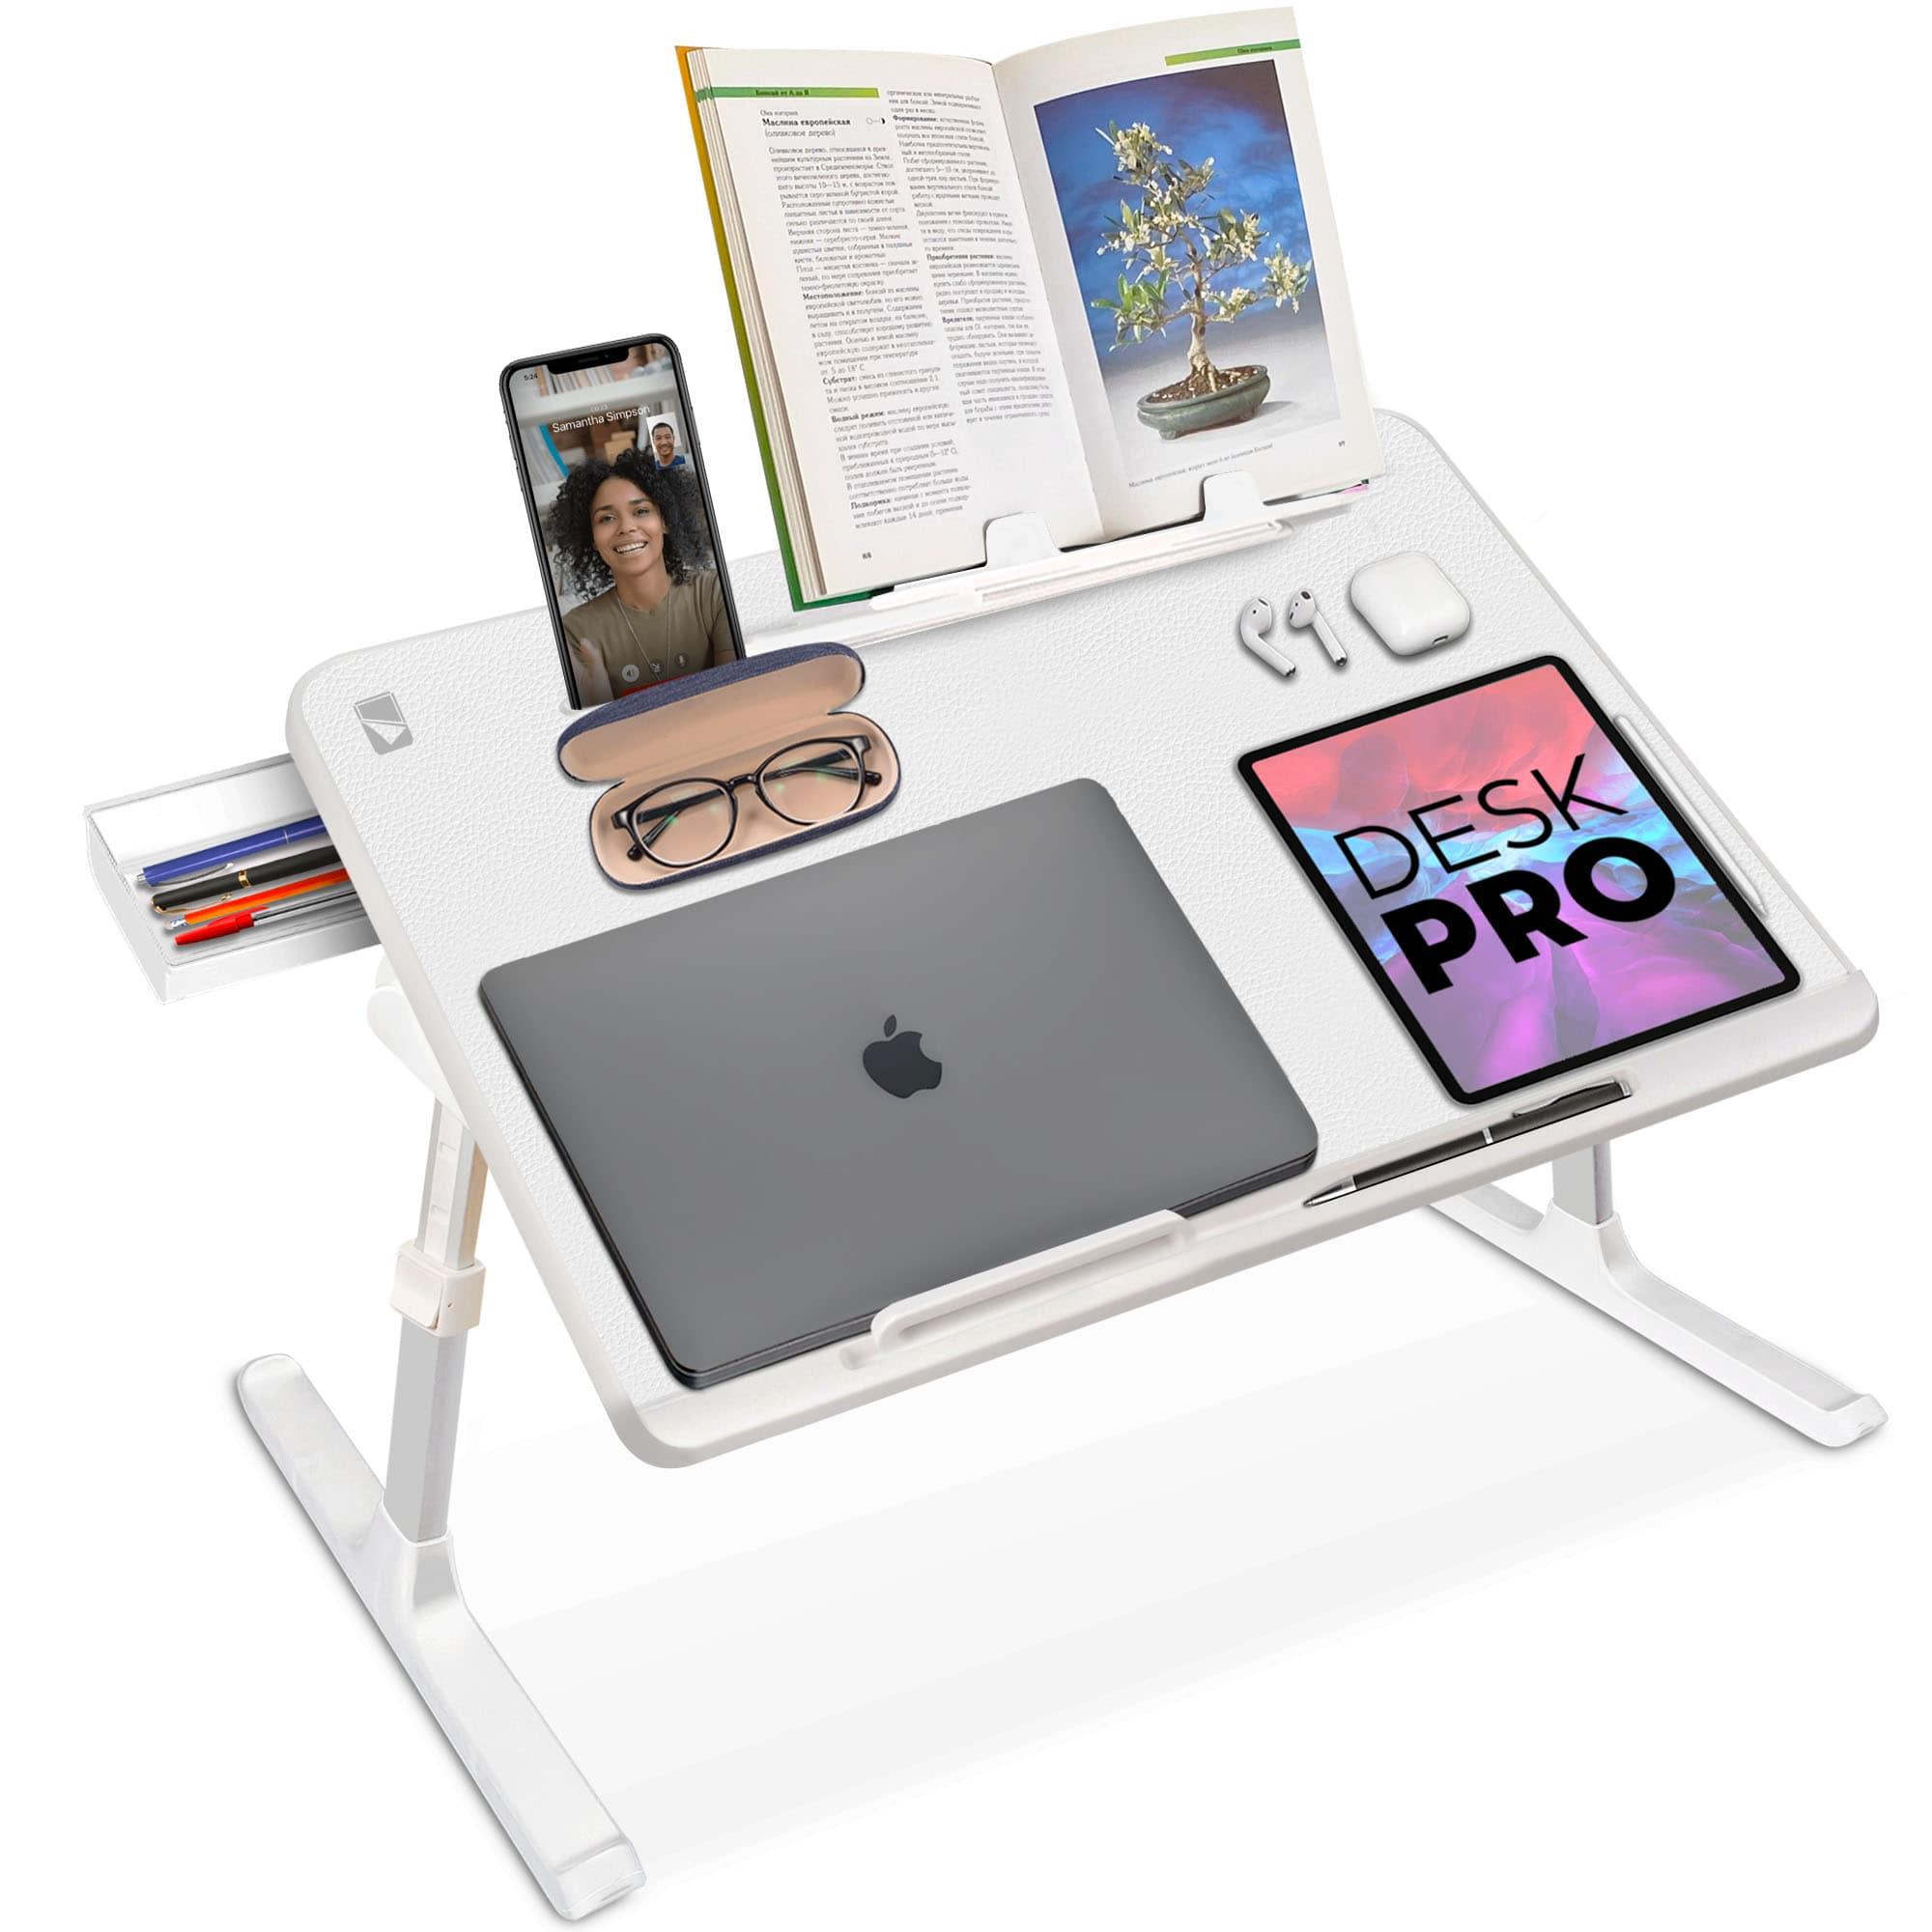 Lap Desk Laptop Bed Table: Fits up to 15.6 inch Laptop Computer lapdesk  with Soft Pillow and Storage Bag - Padded Lap Work Tray and Gaming Desk on  Bed